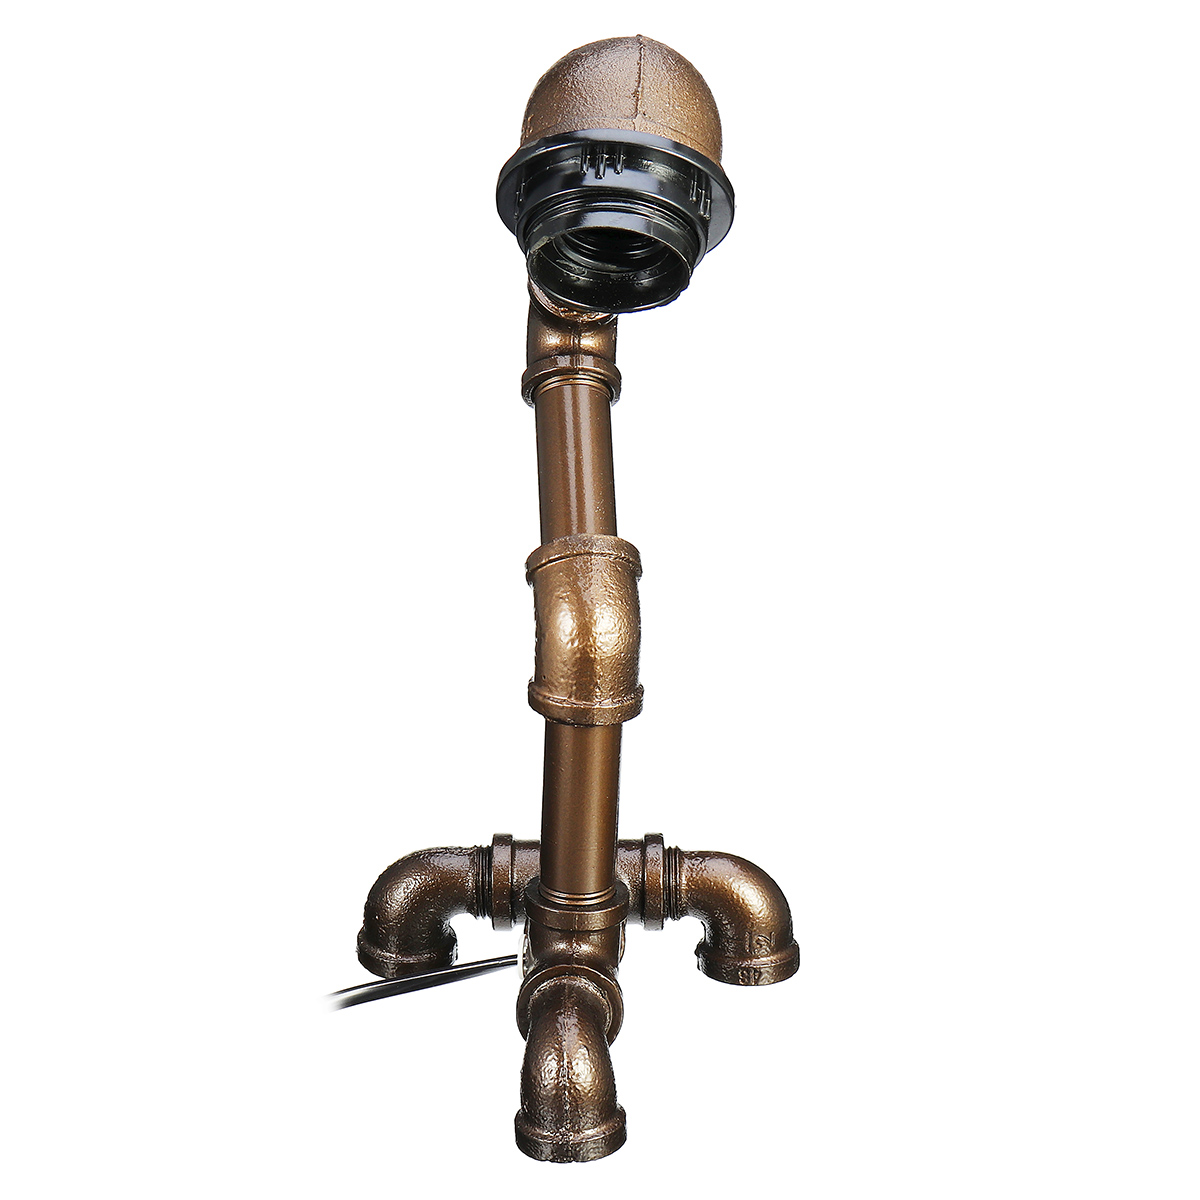 Vintage-Industrial-Robot-Light-Water-Pipe-Steampunk-Desk-Table-Lamp-Bedroom-E27-1431974-6